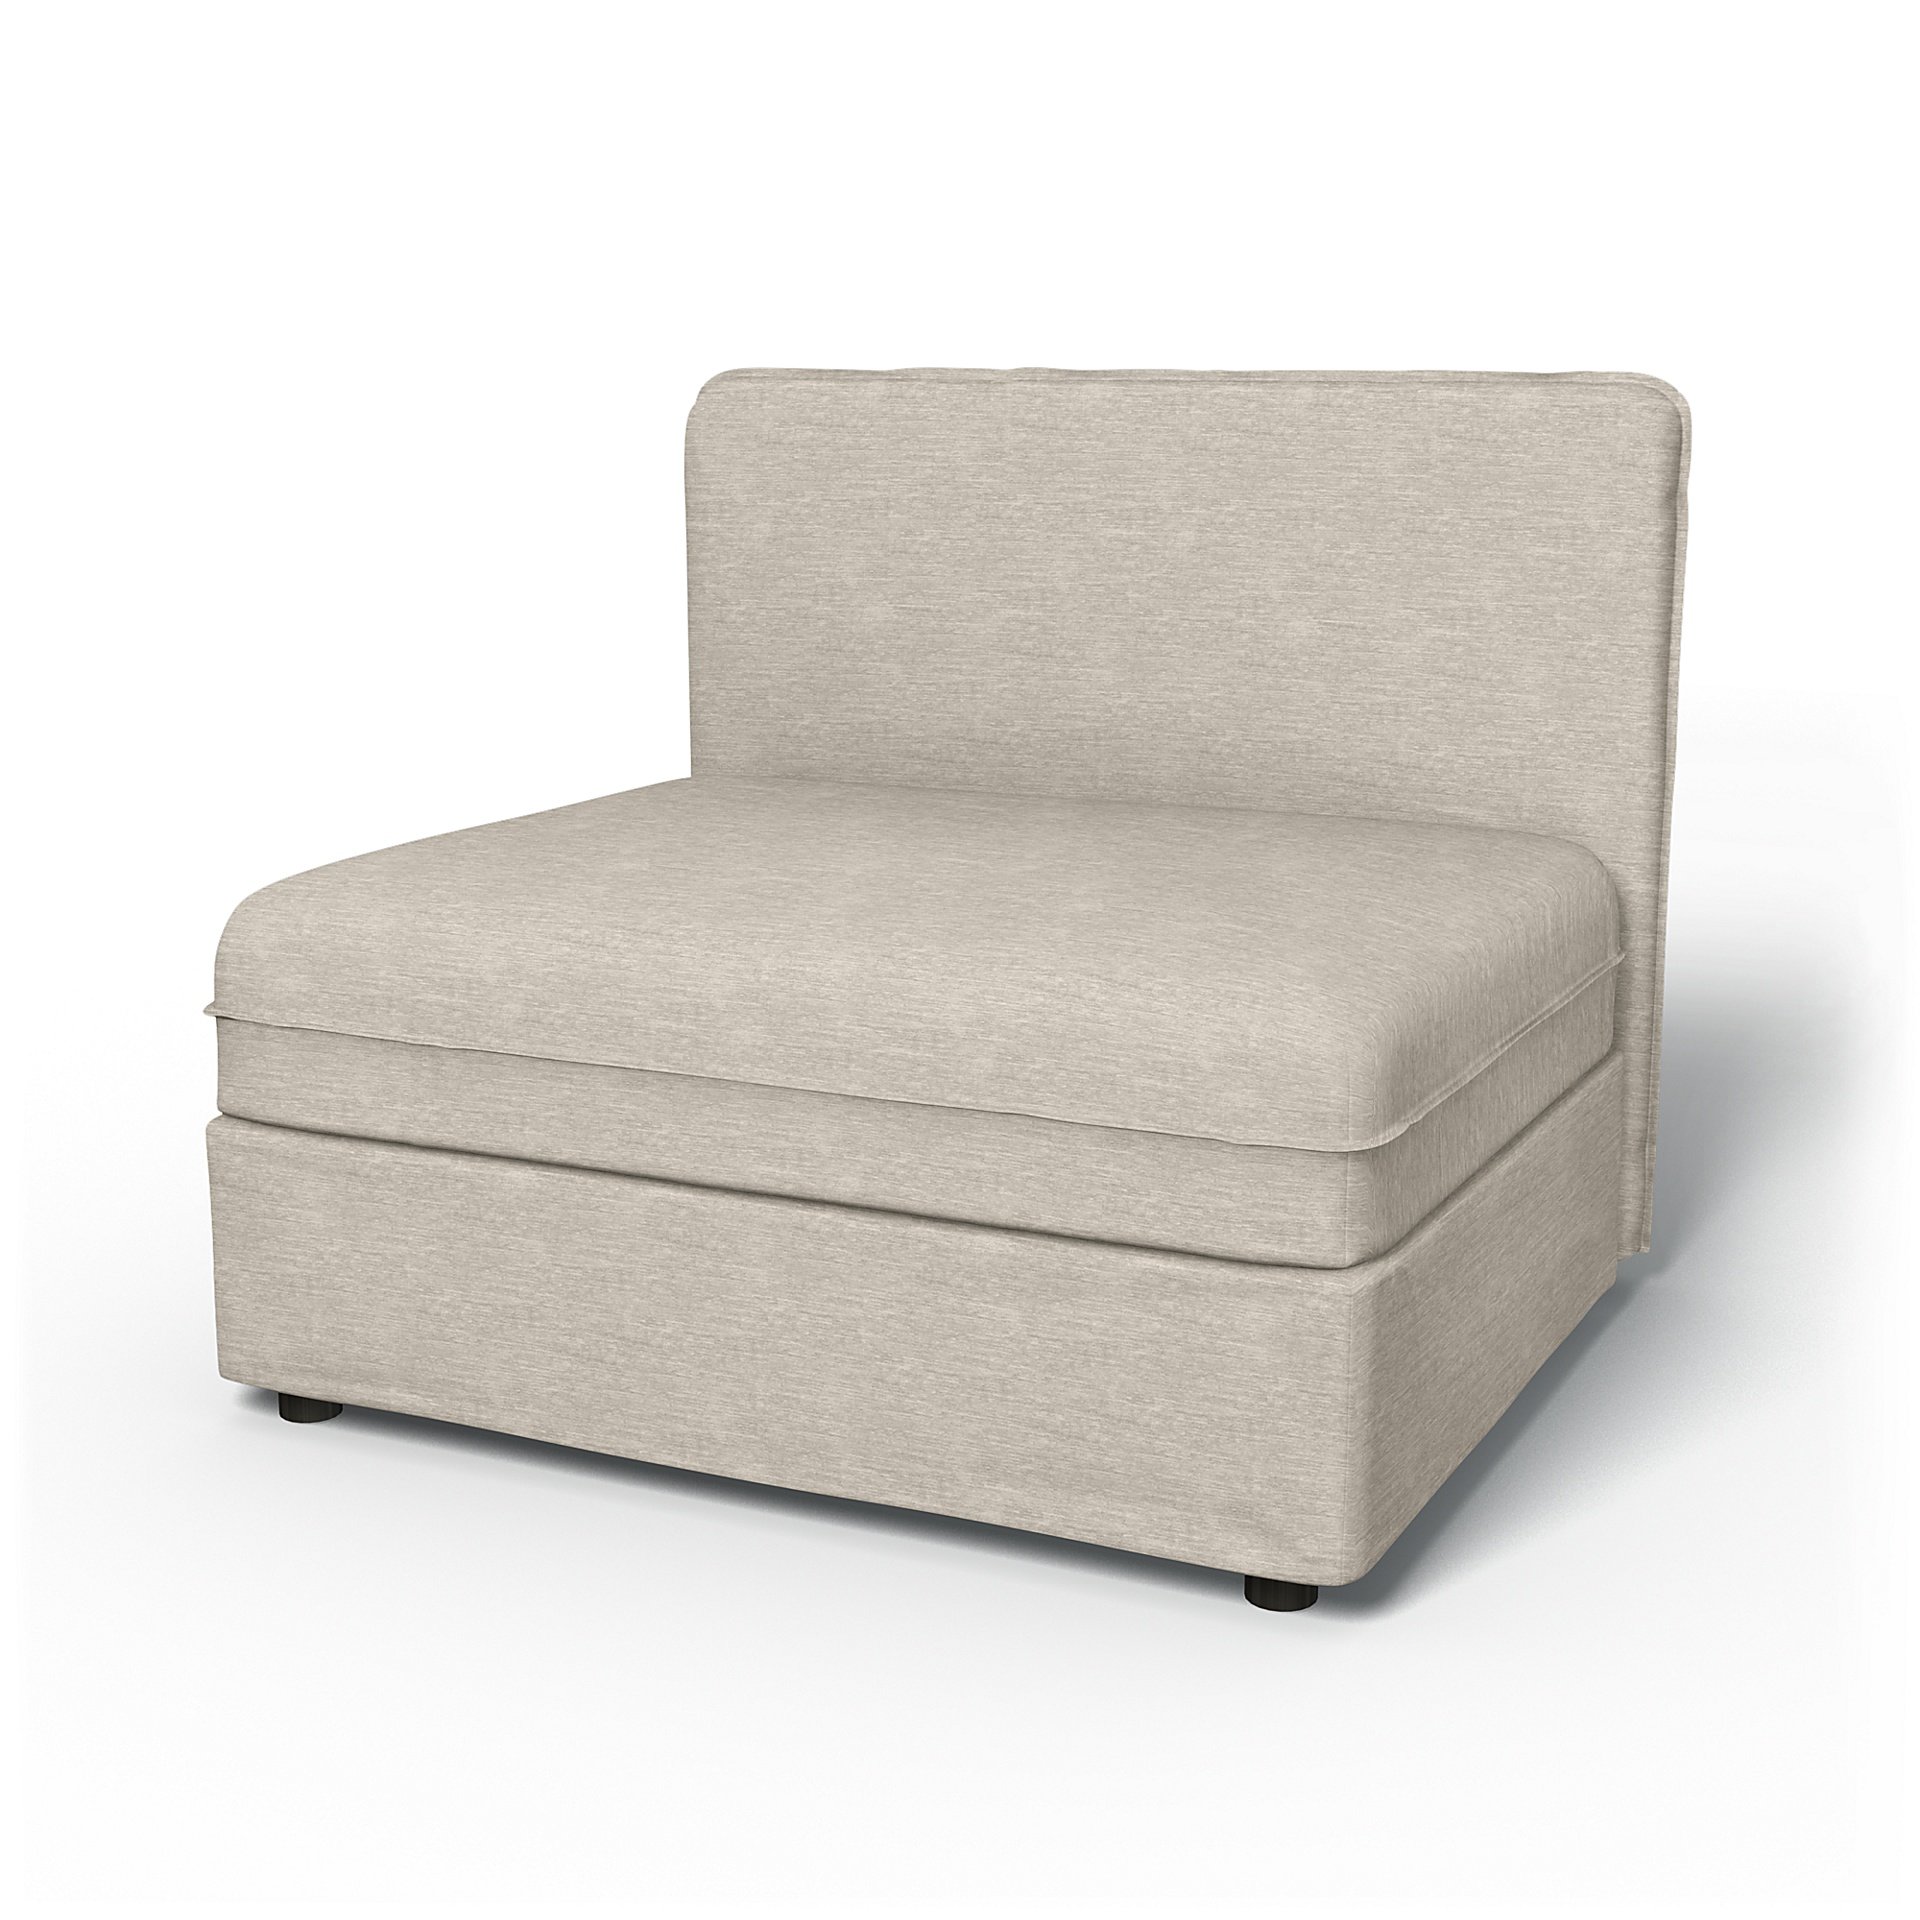 IKEA - Vallentuna Seat Module with Low Back Cover 100x80cm 39x32in, Natural White, Velvet - Bemz